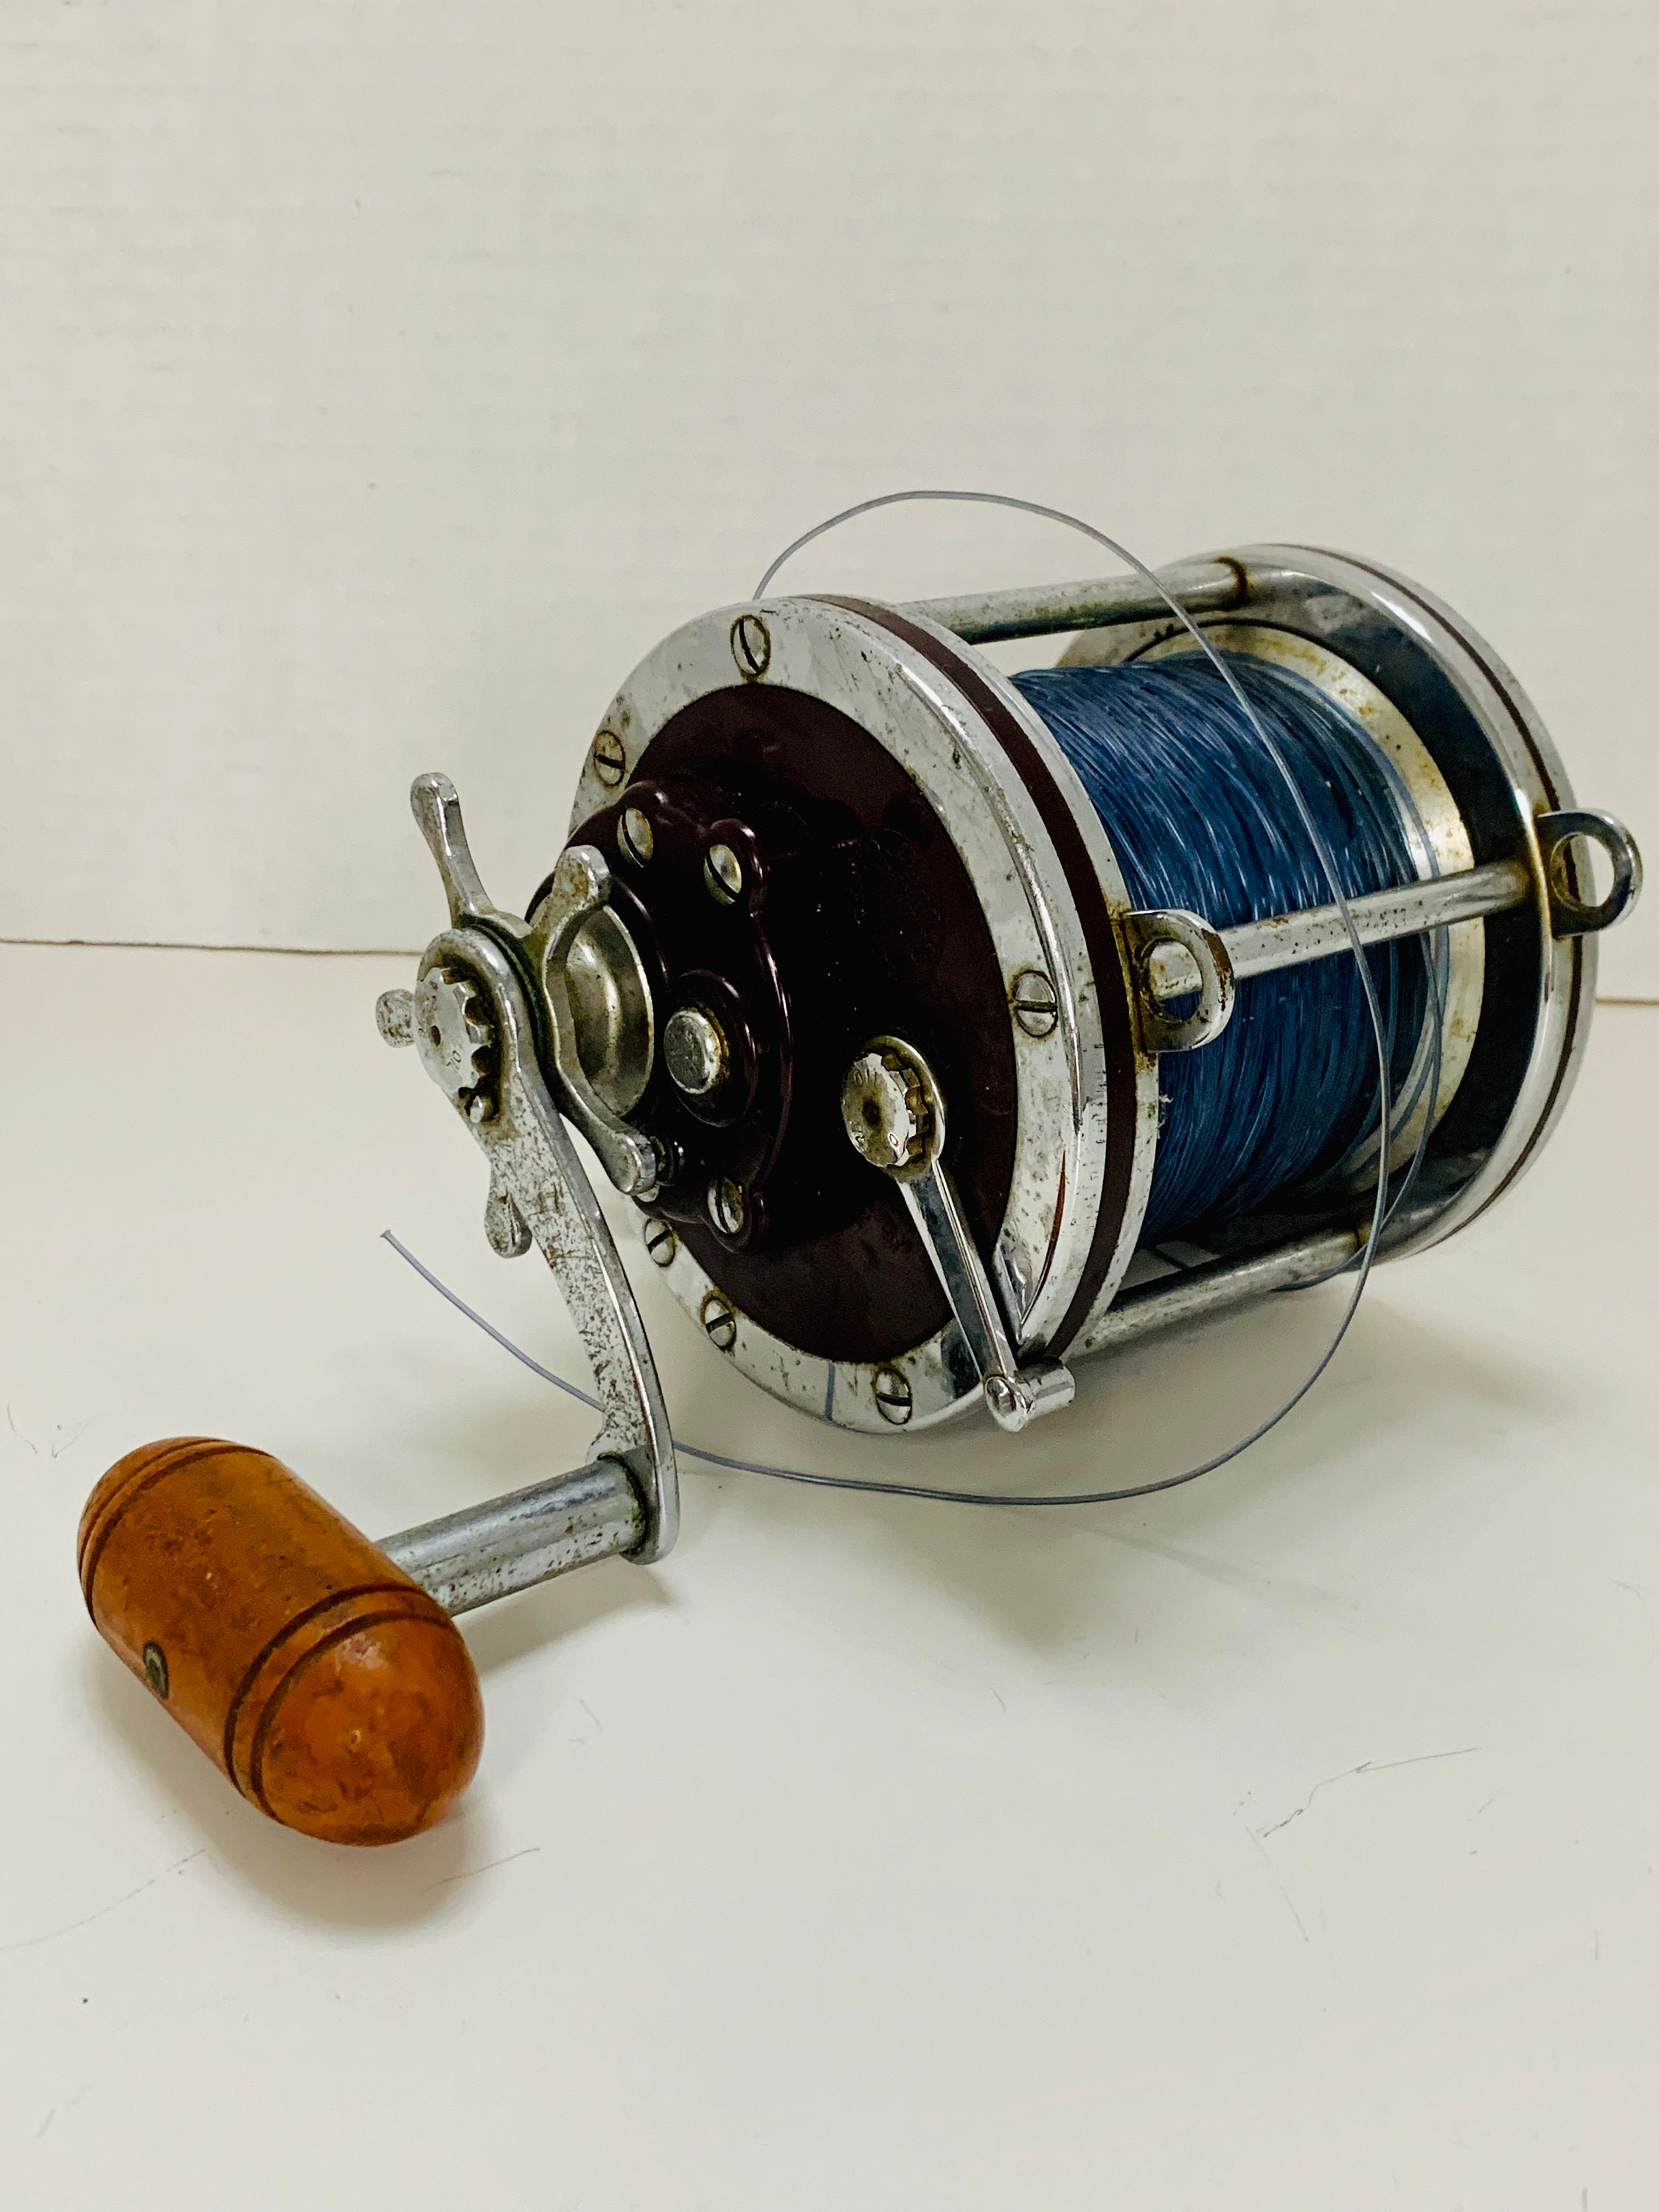 Sold at Auction: 2x Vintage Penn Big Game Sea Fishing Reels – Penn Senator  112 3/0 Game Fish Reel and Penn No149 with